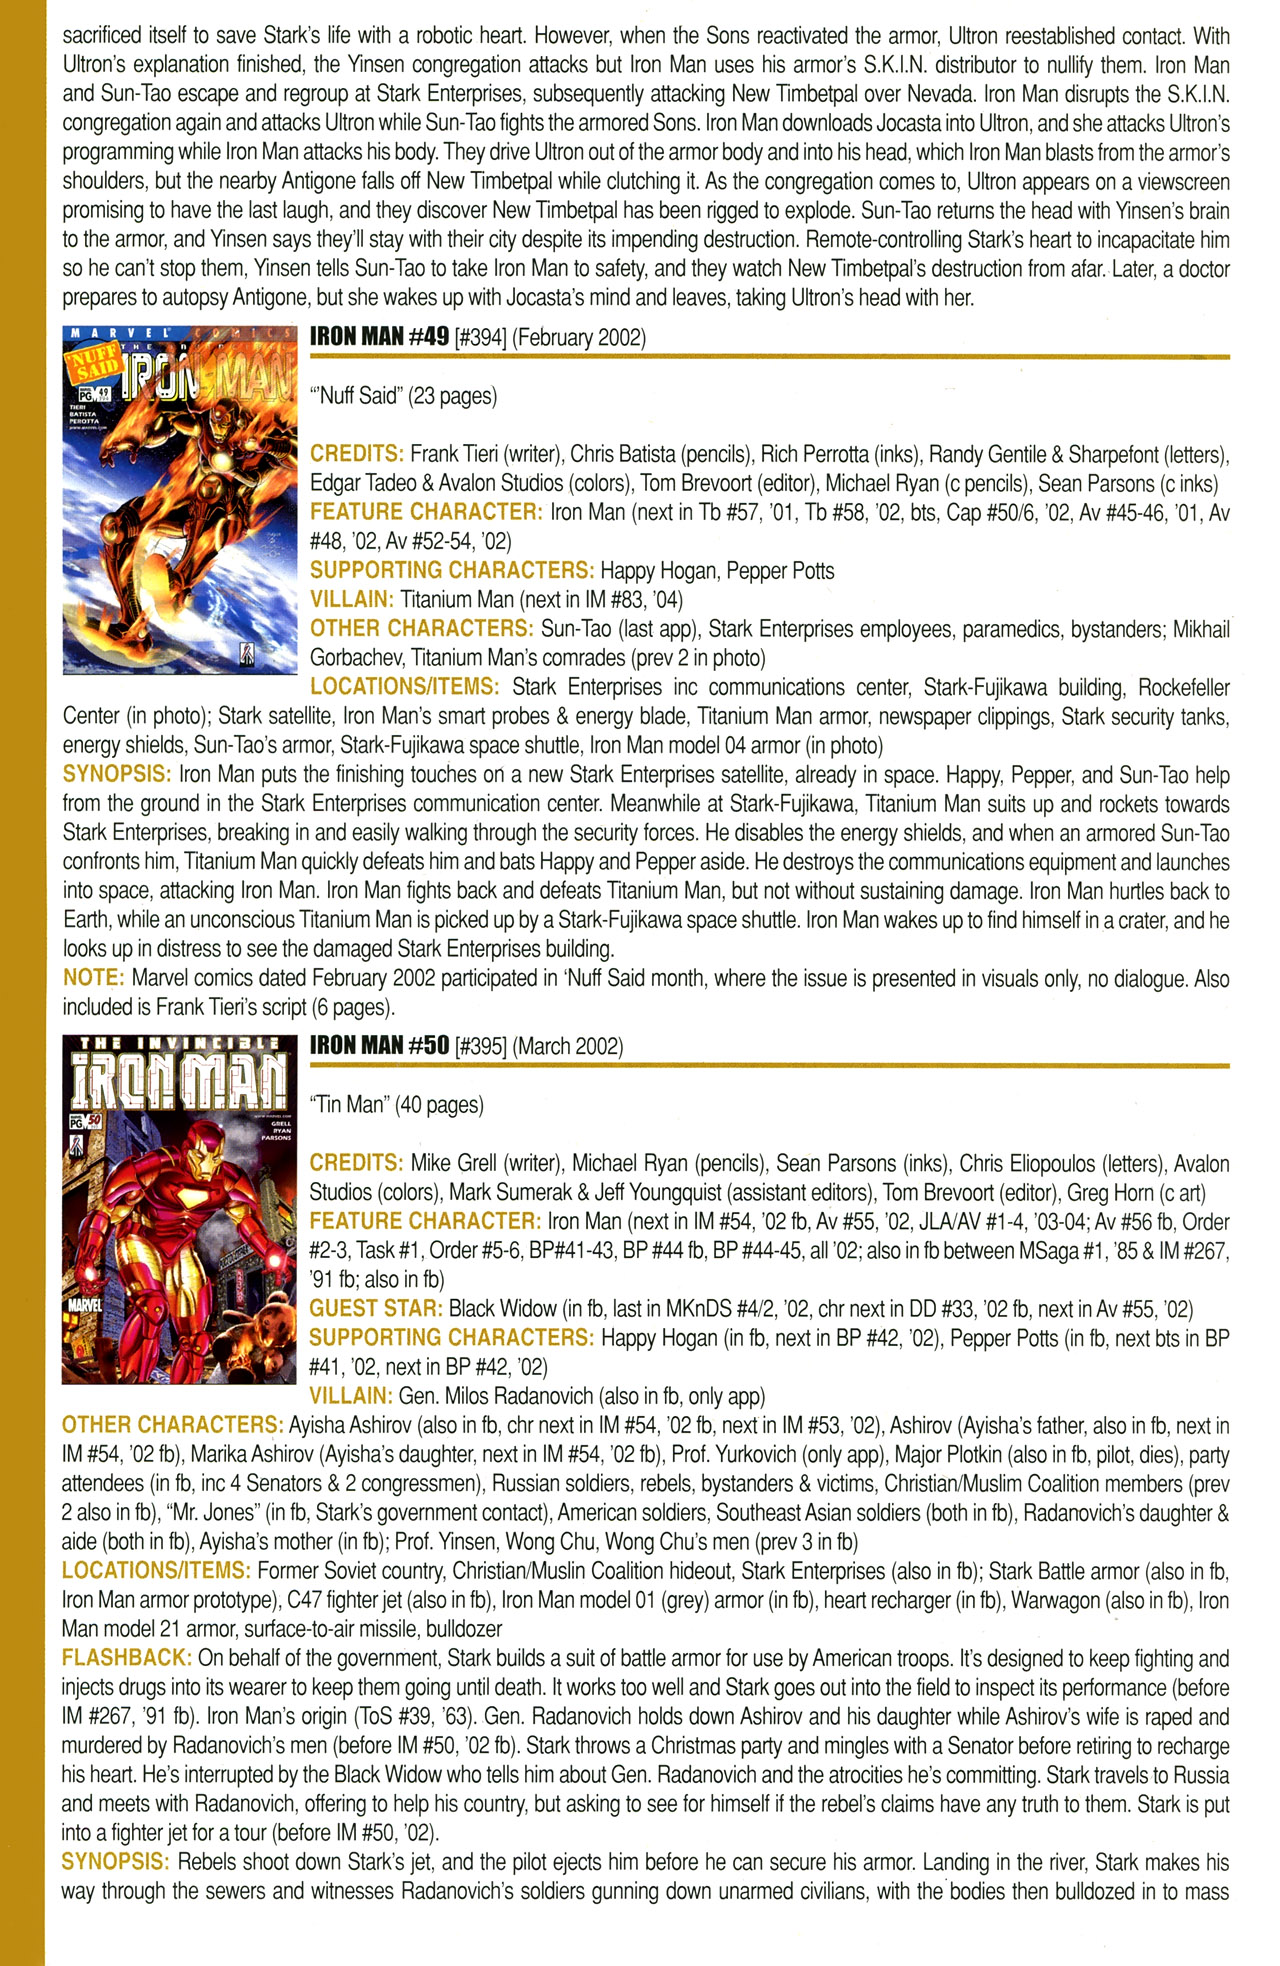 Read online Official Index to the Marvel Universe comic -  Issue #11 - 32